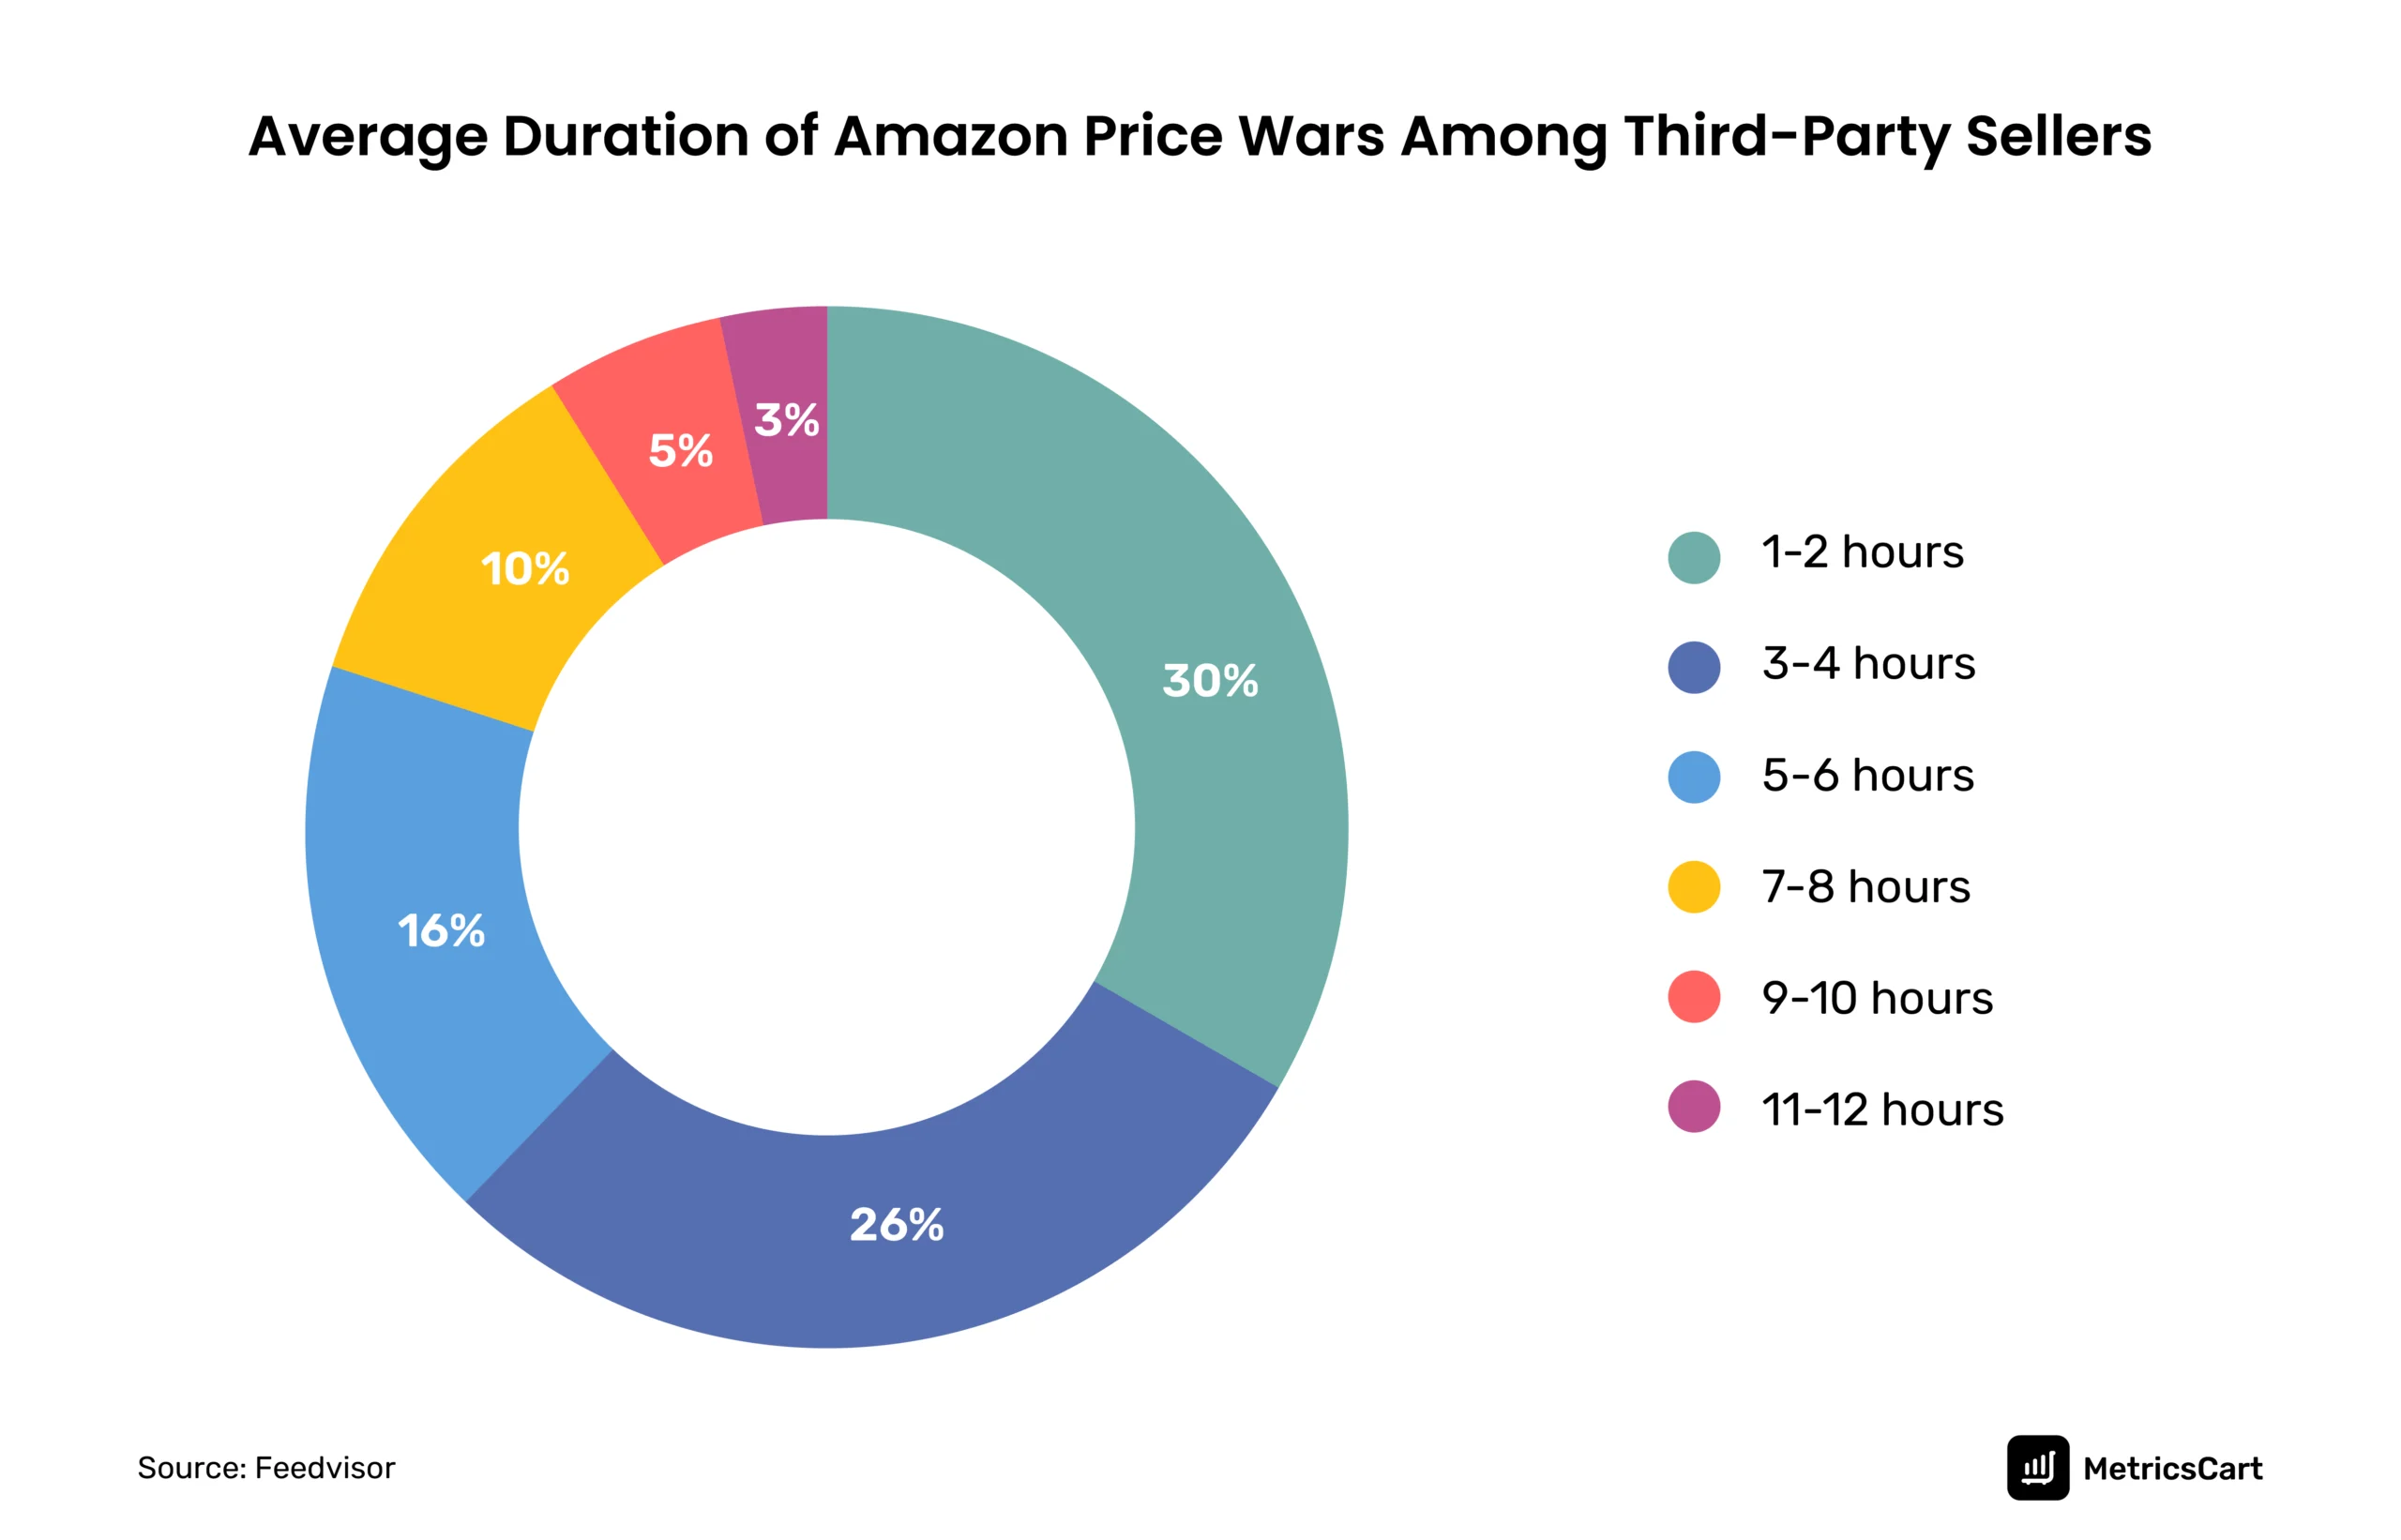 Pie chart depicting the average duration of price wars between third-party sellers on Amazon